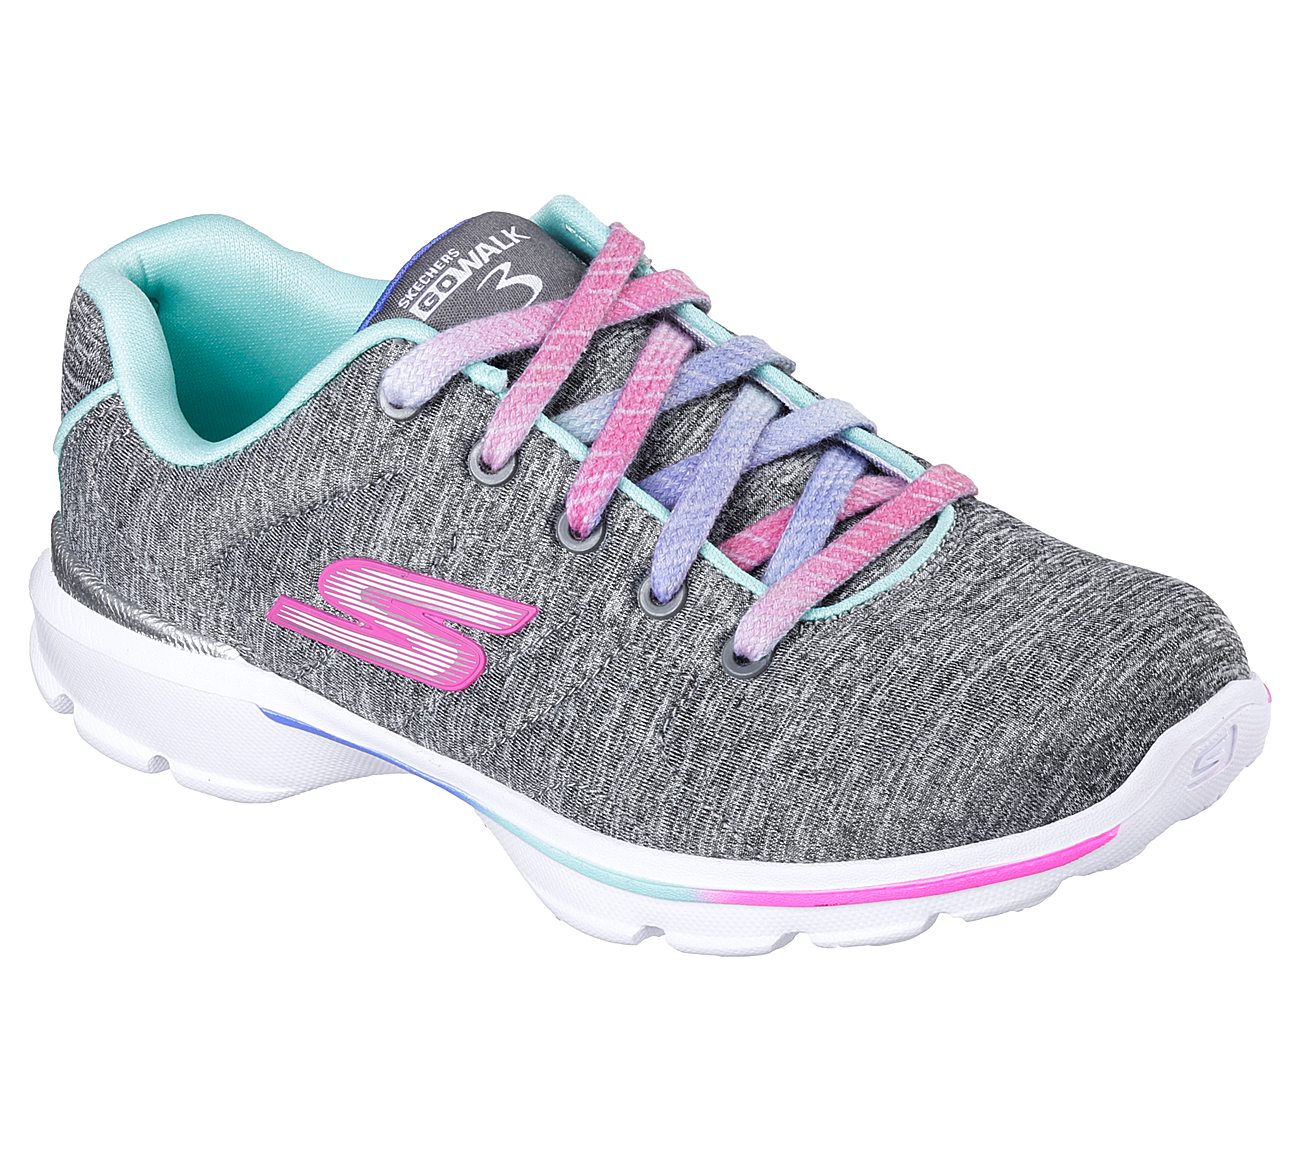 skechers go walk 3 with laces